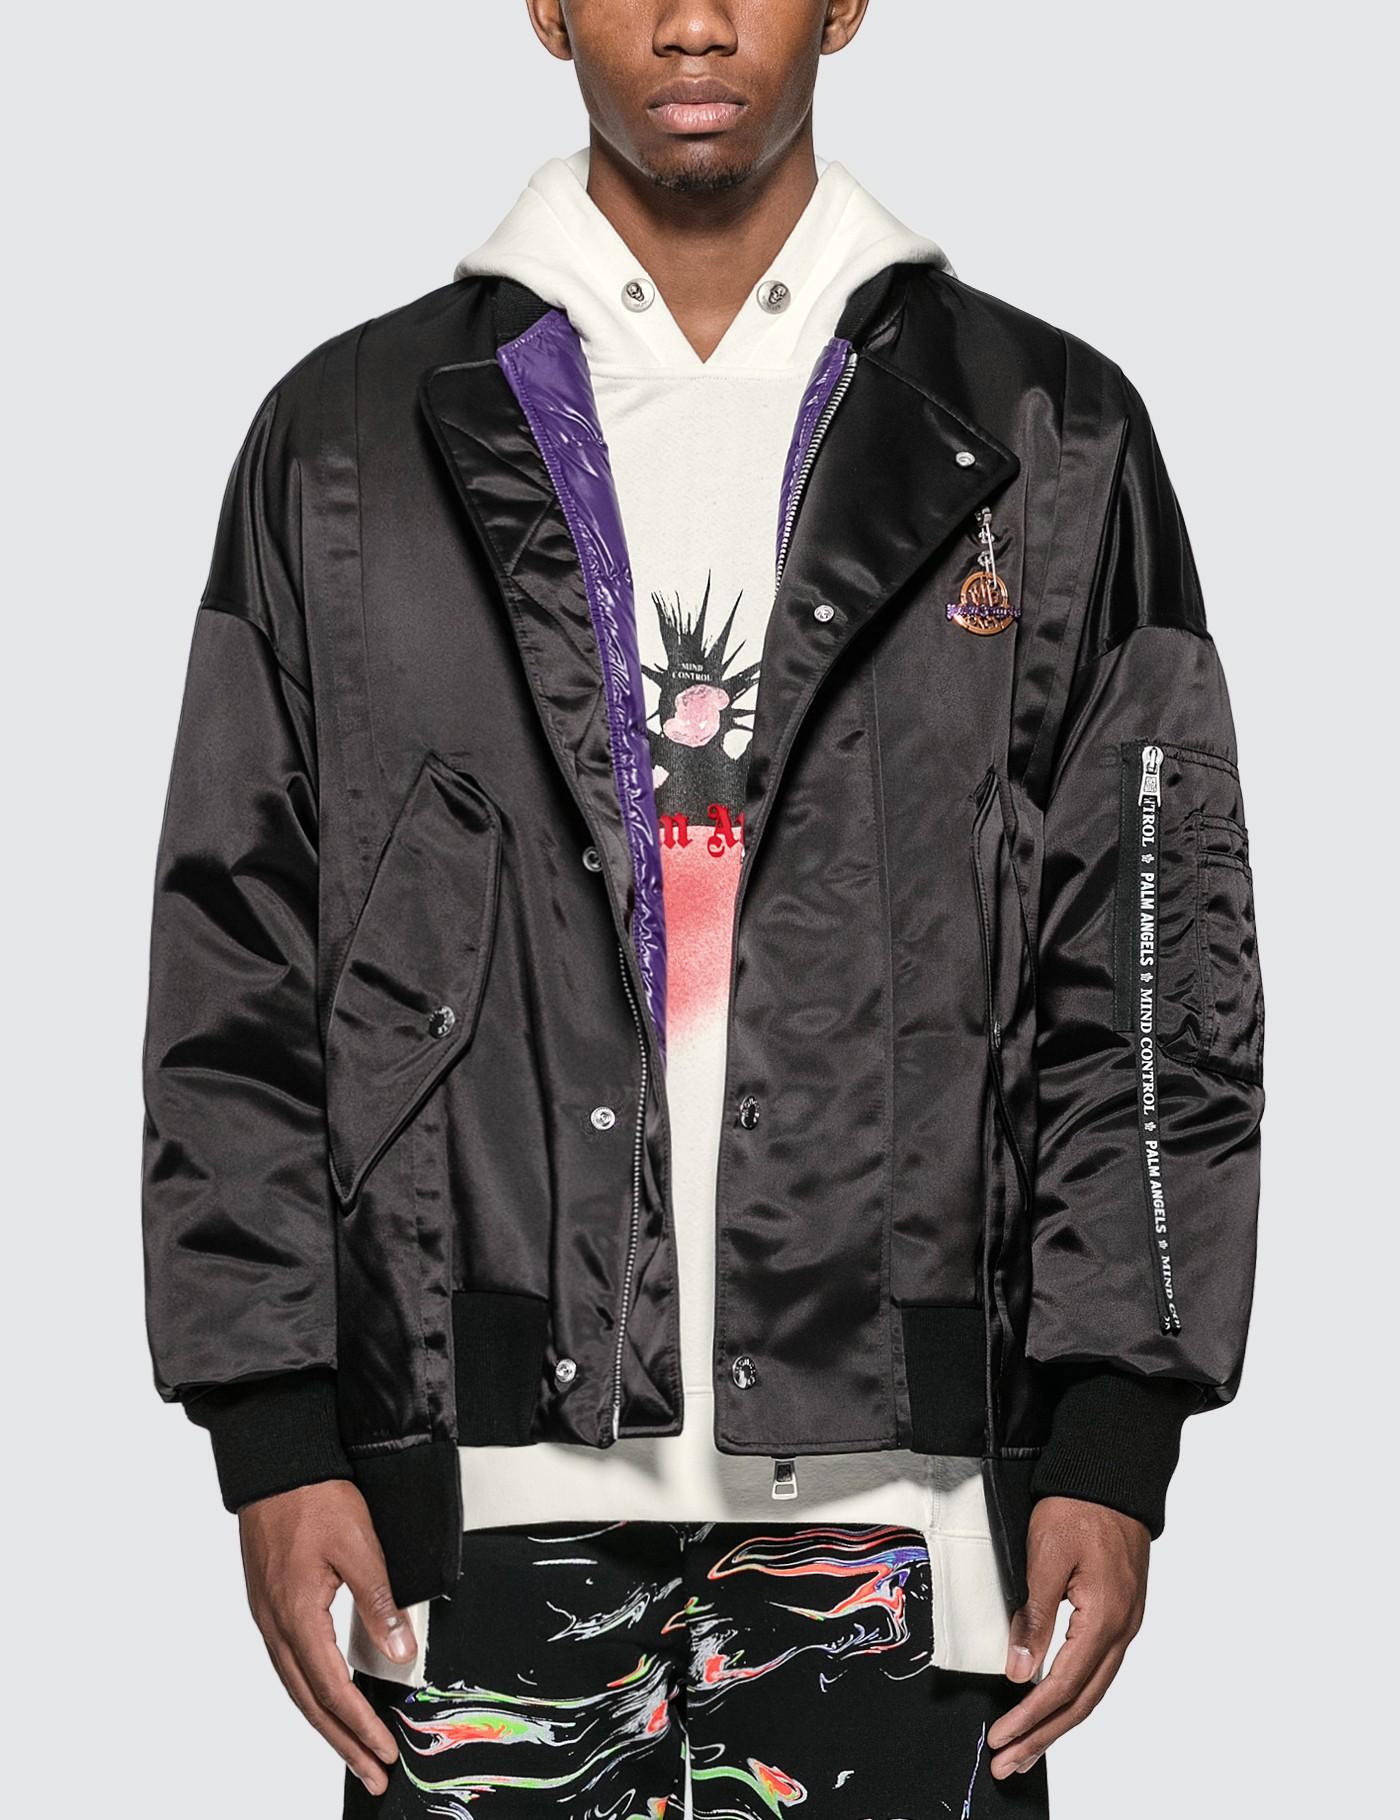 Moncler Genius X Palm Angels Down Bomber Jacket in Black for Men - Lyst